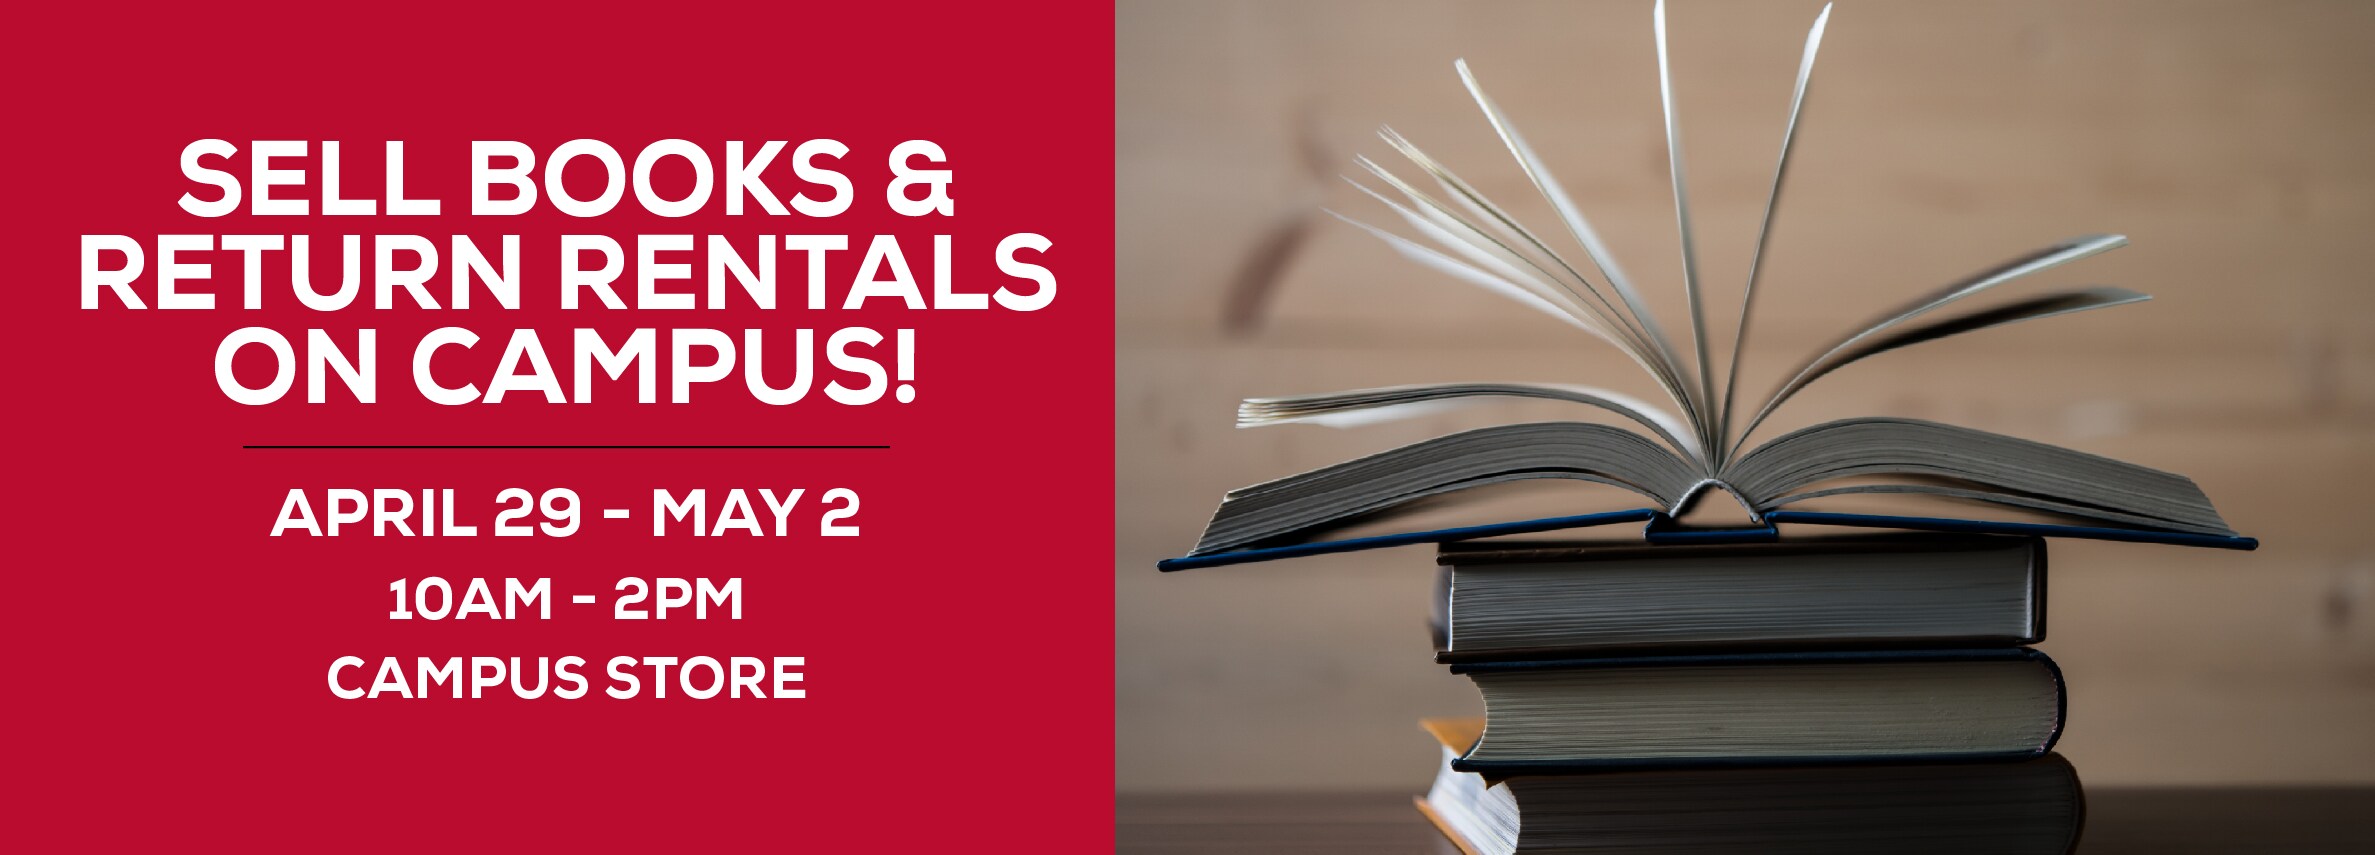 Sell Books & Return Rentals On Campus! April 29 - May 2. 10am to 2pm at the Campus Store